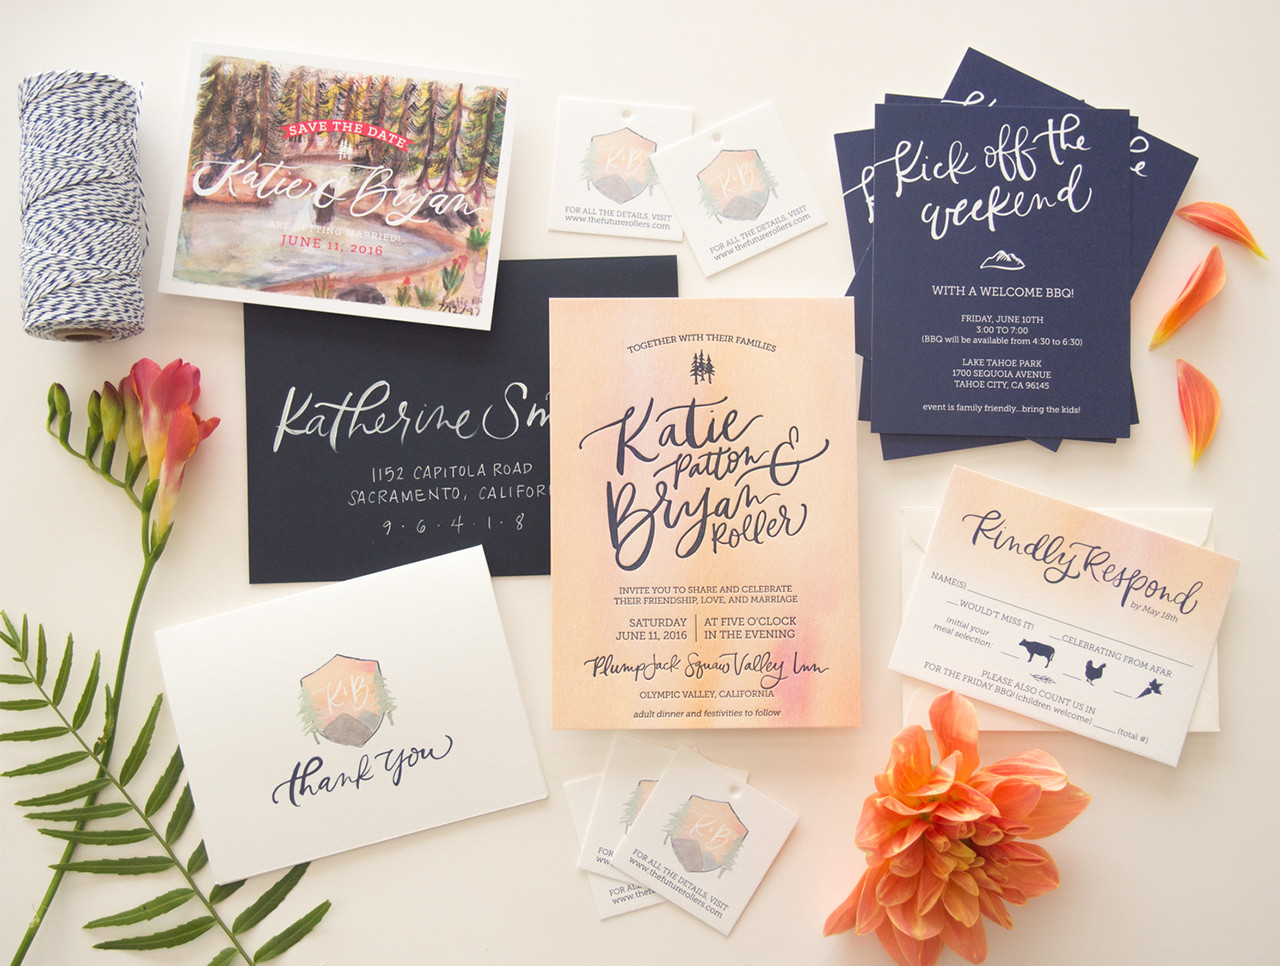 Best Wedding Invitations of 2016: Peach and Navy Blue Watercolor Wedding Invitations by Bright Room Studio